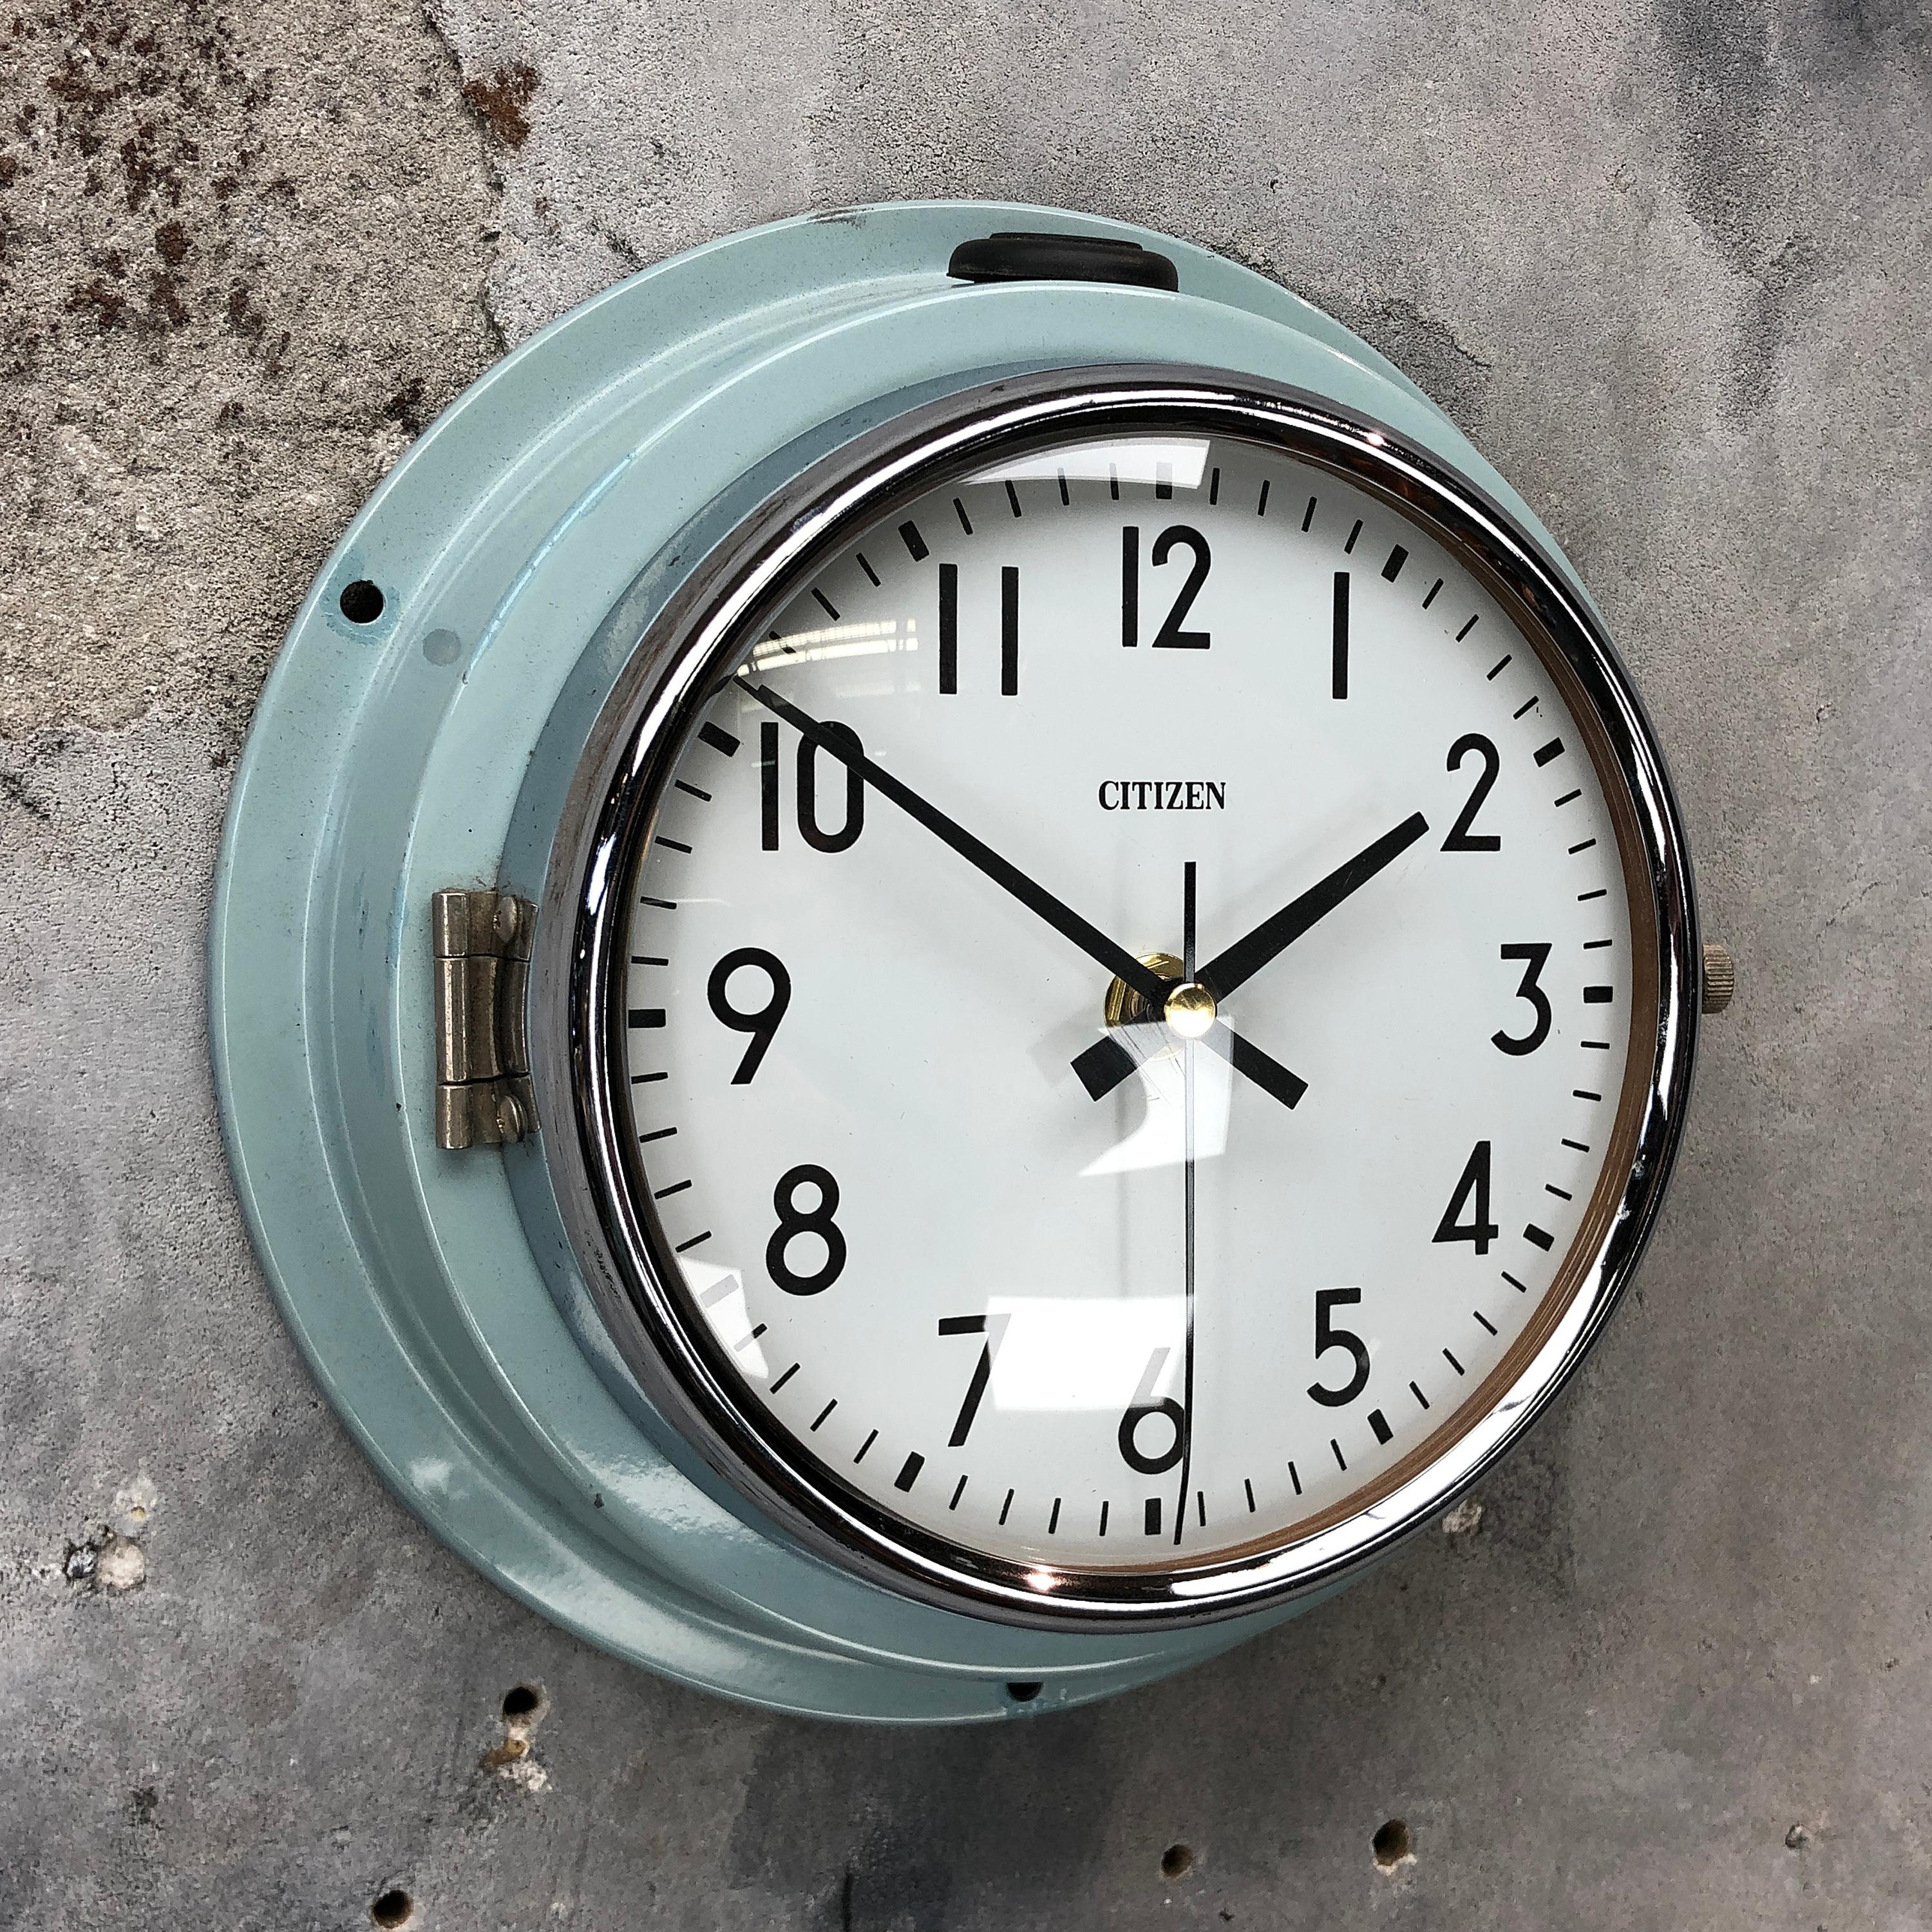 Citizen super tanker slave clock original blue finish.

A reclaimed and restored maritime slave clock also called secondary clock of superior build quality.

These clocks were used in great numbers on super tankers, cargo ships and military